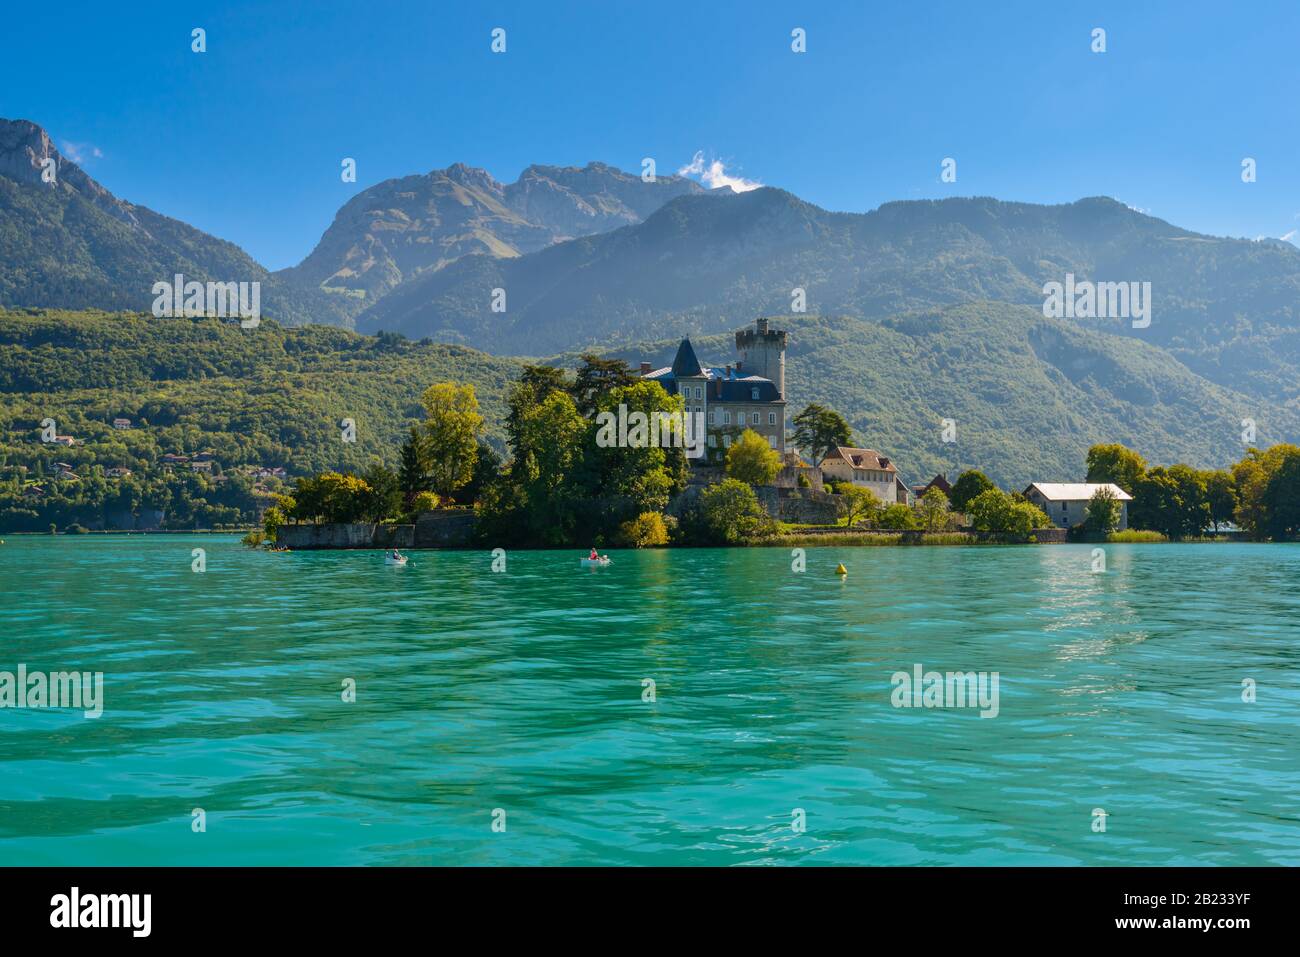 Château de Duingt located on a small island on Lake Annecy connected by a causeway to the mainland in the village of Duingt, France. Stock Photo